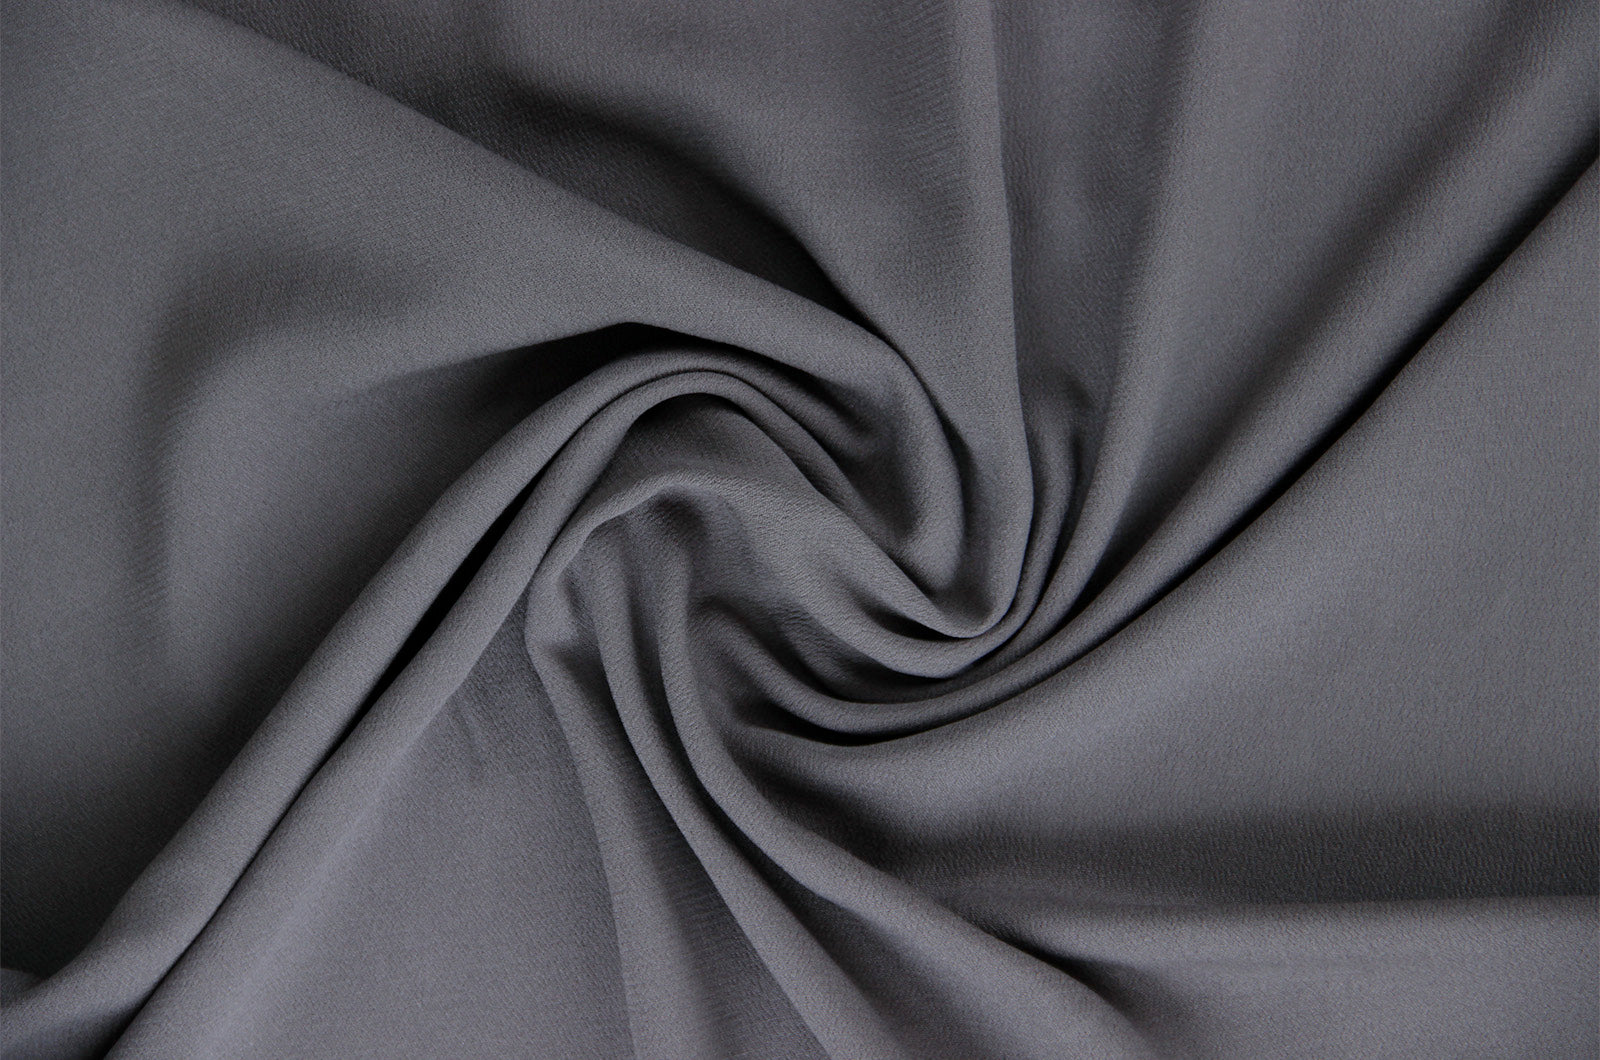 Viscose crepe * From 50 cm-23